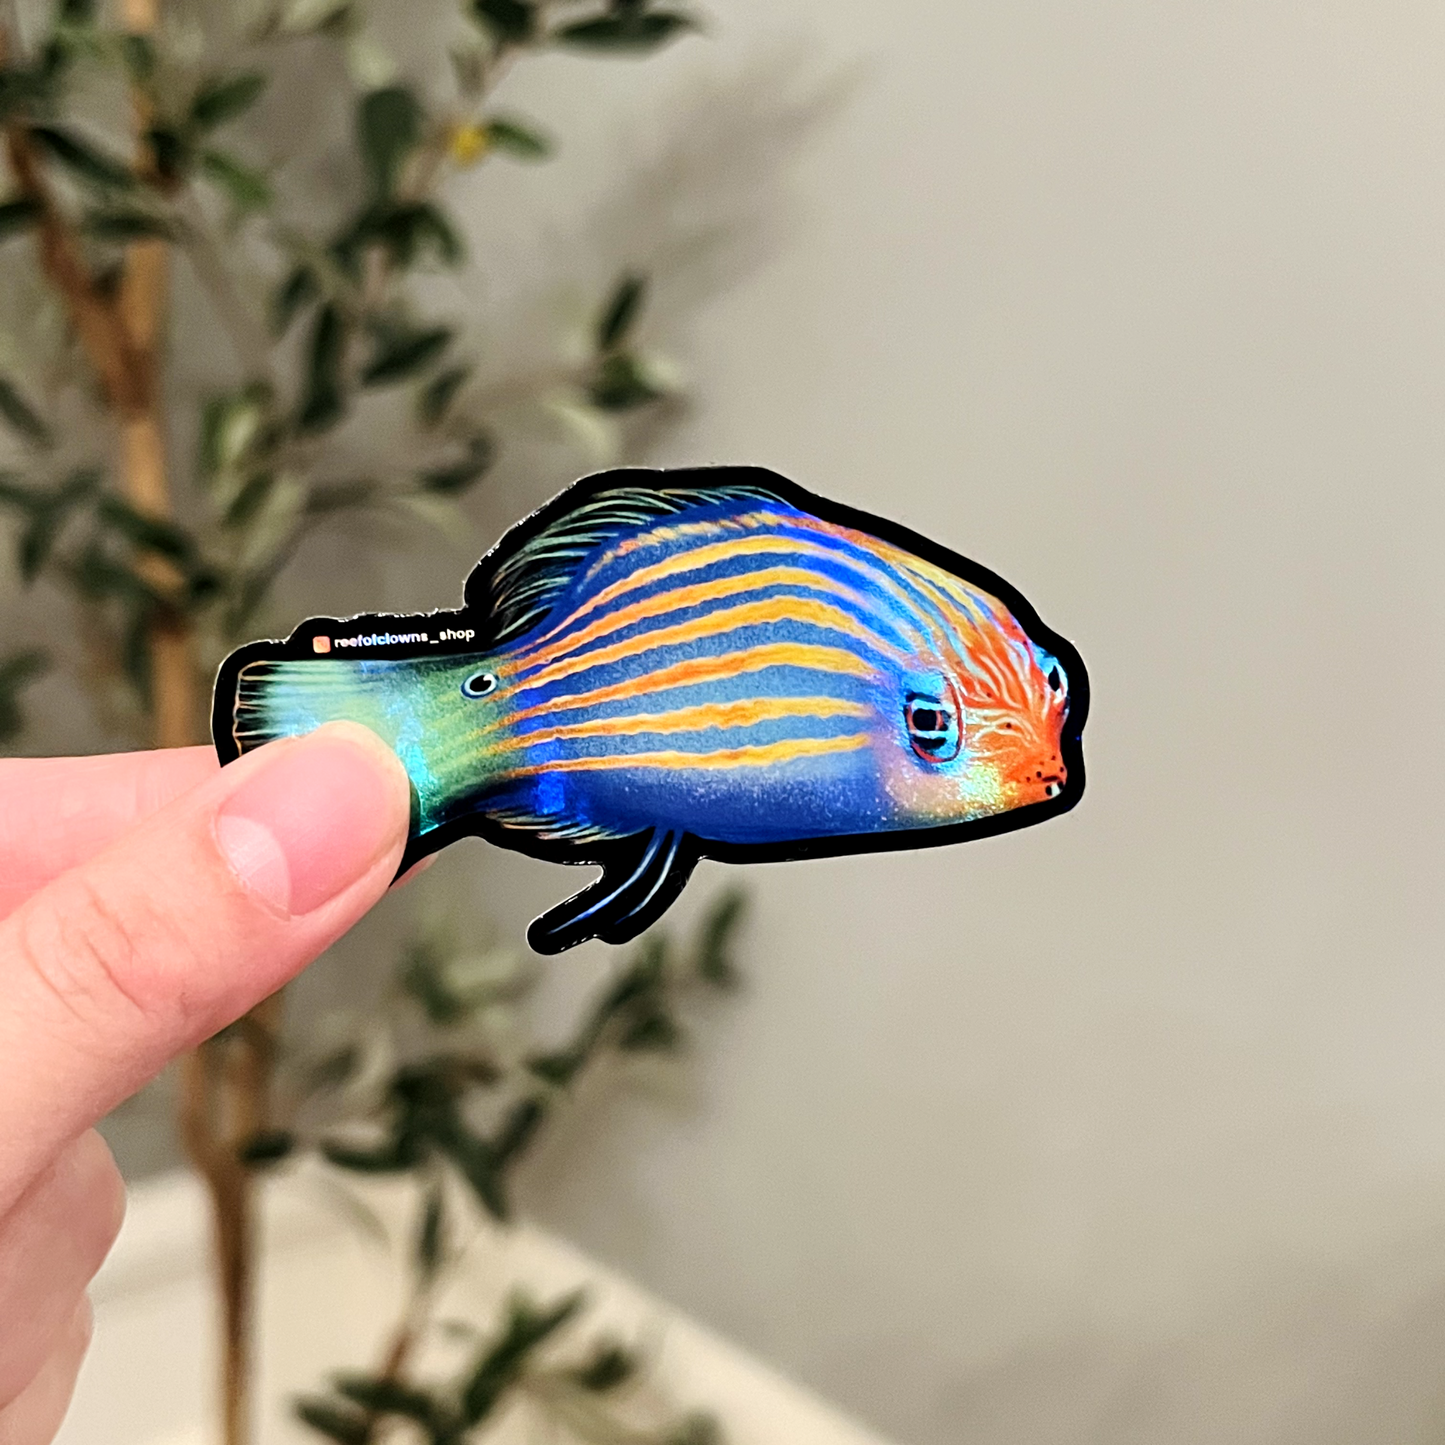 Six-line Wrasse (Holographic) - Reef of Clowns